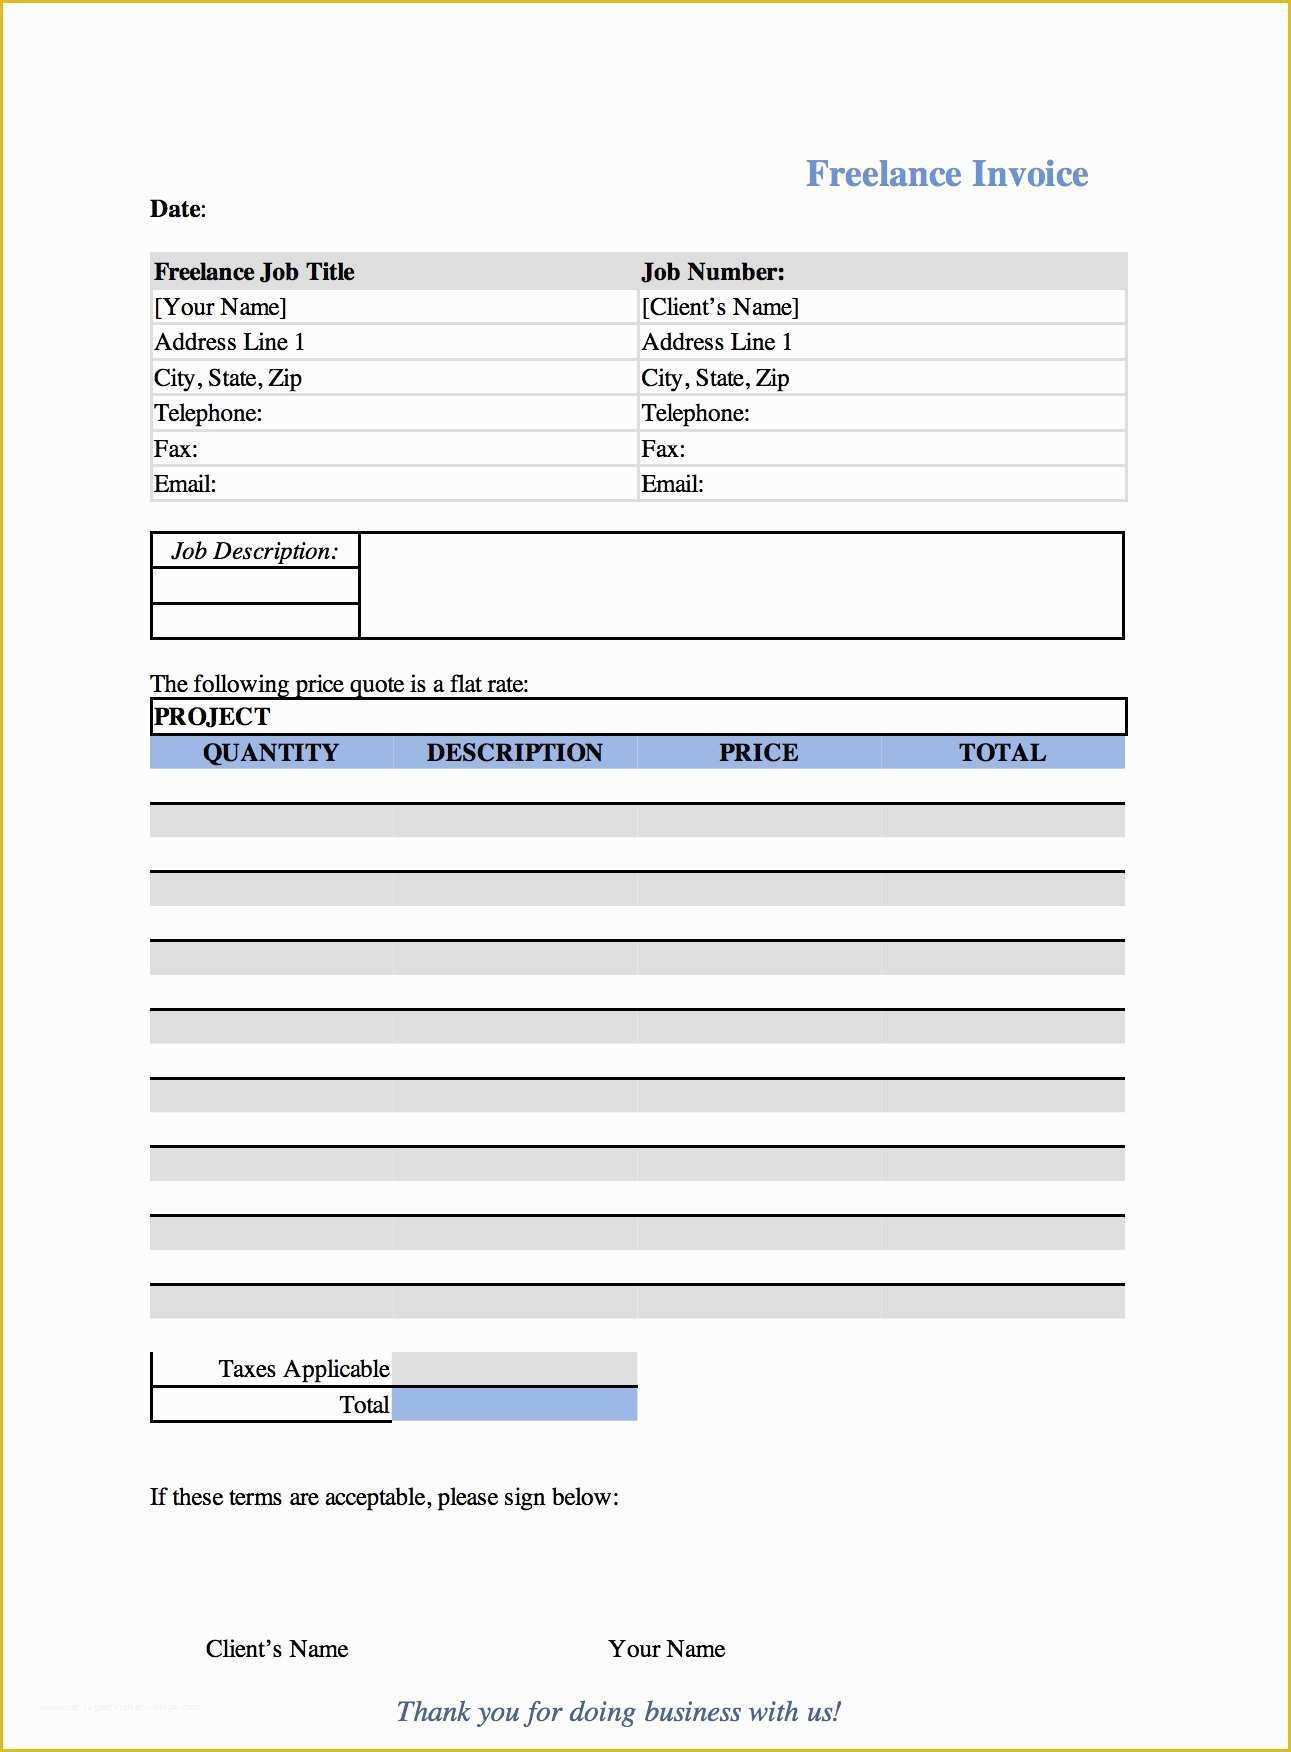 Free Invoice Template Of Aynax Invoice Template